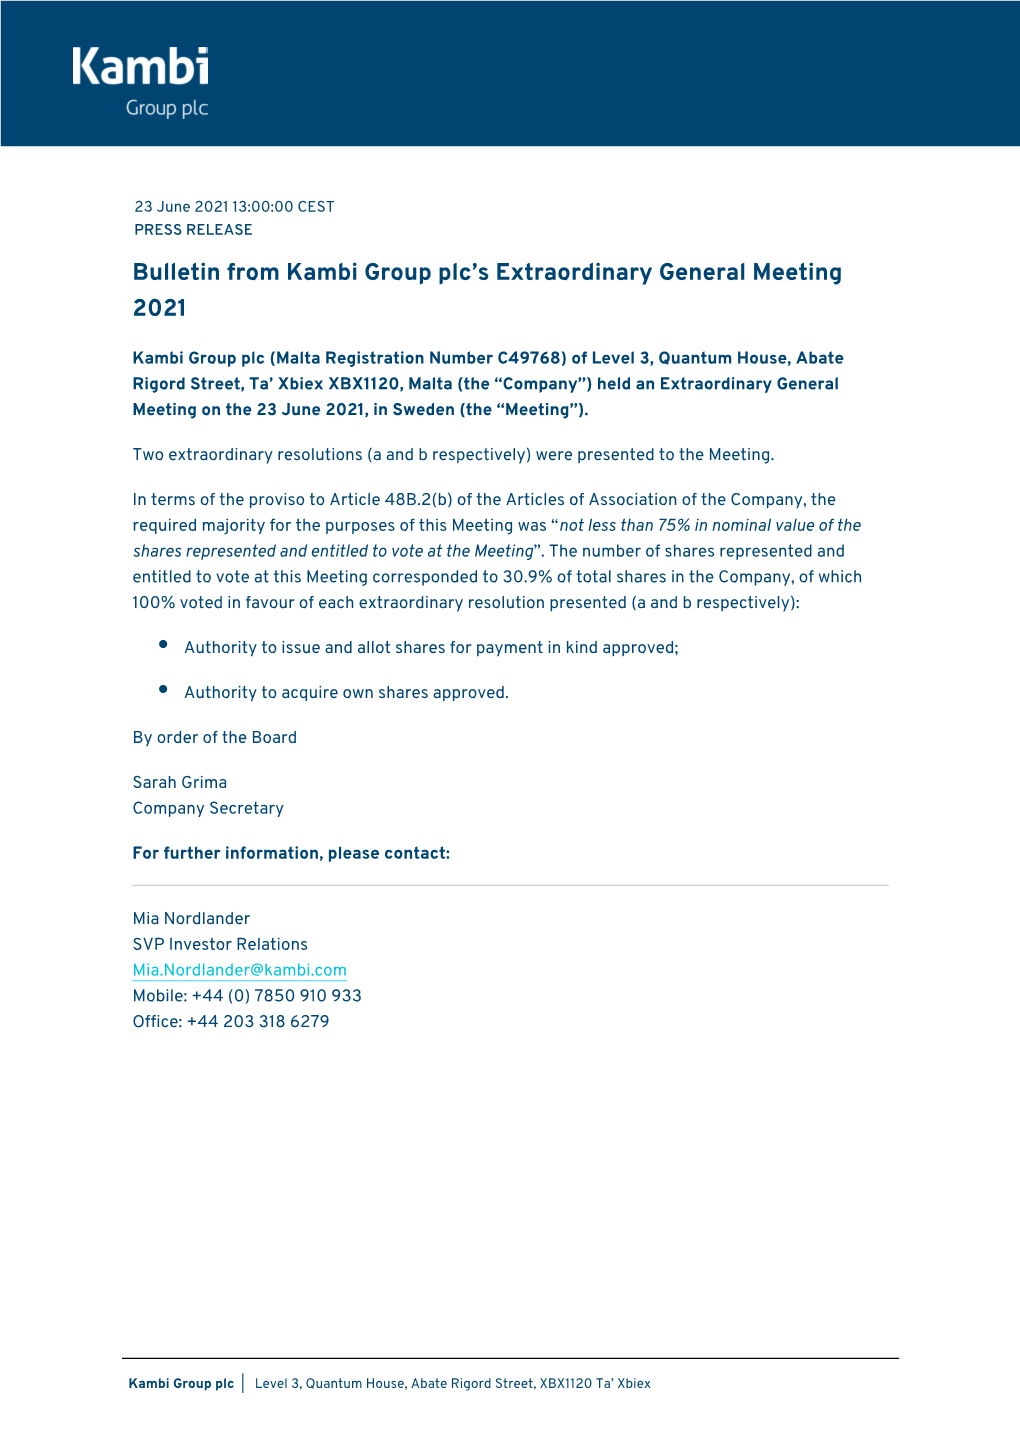 Bulletin from Kambi Group Plc's Extraordinary General Meeting 2021